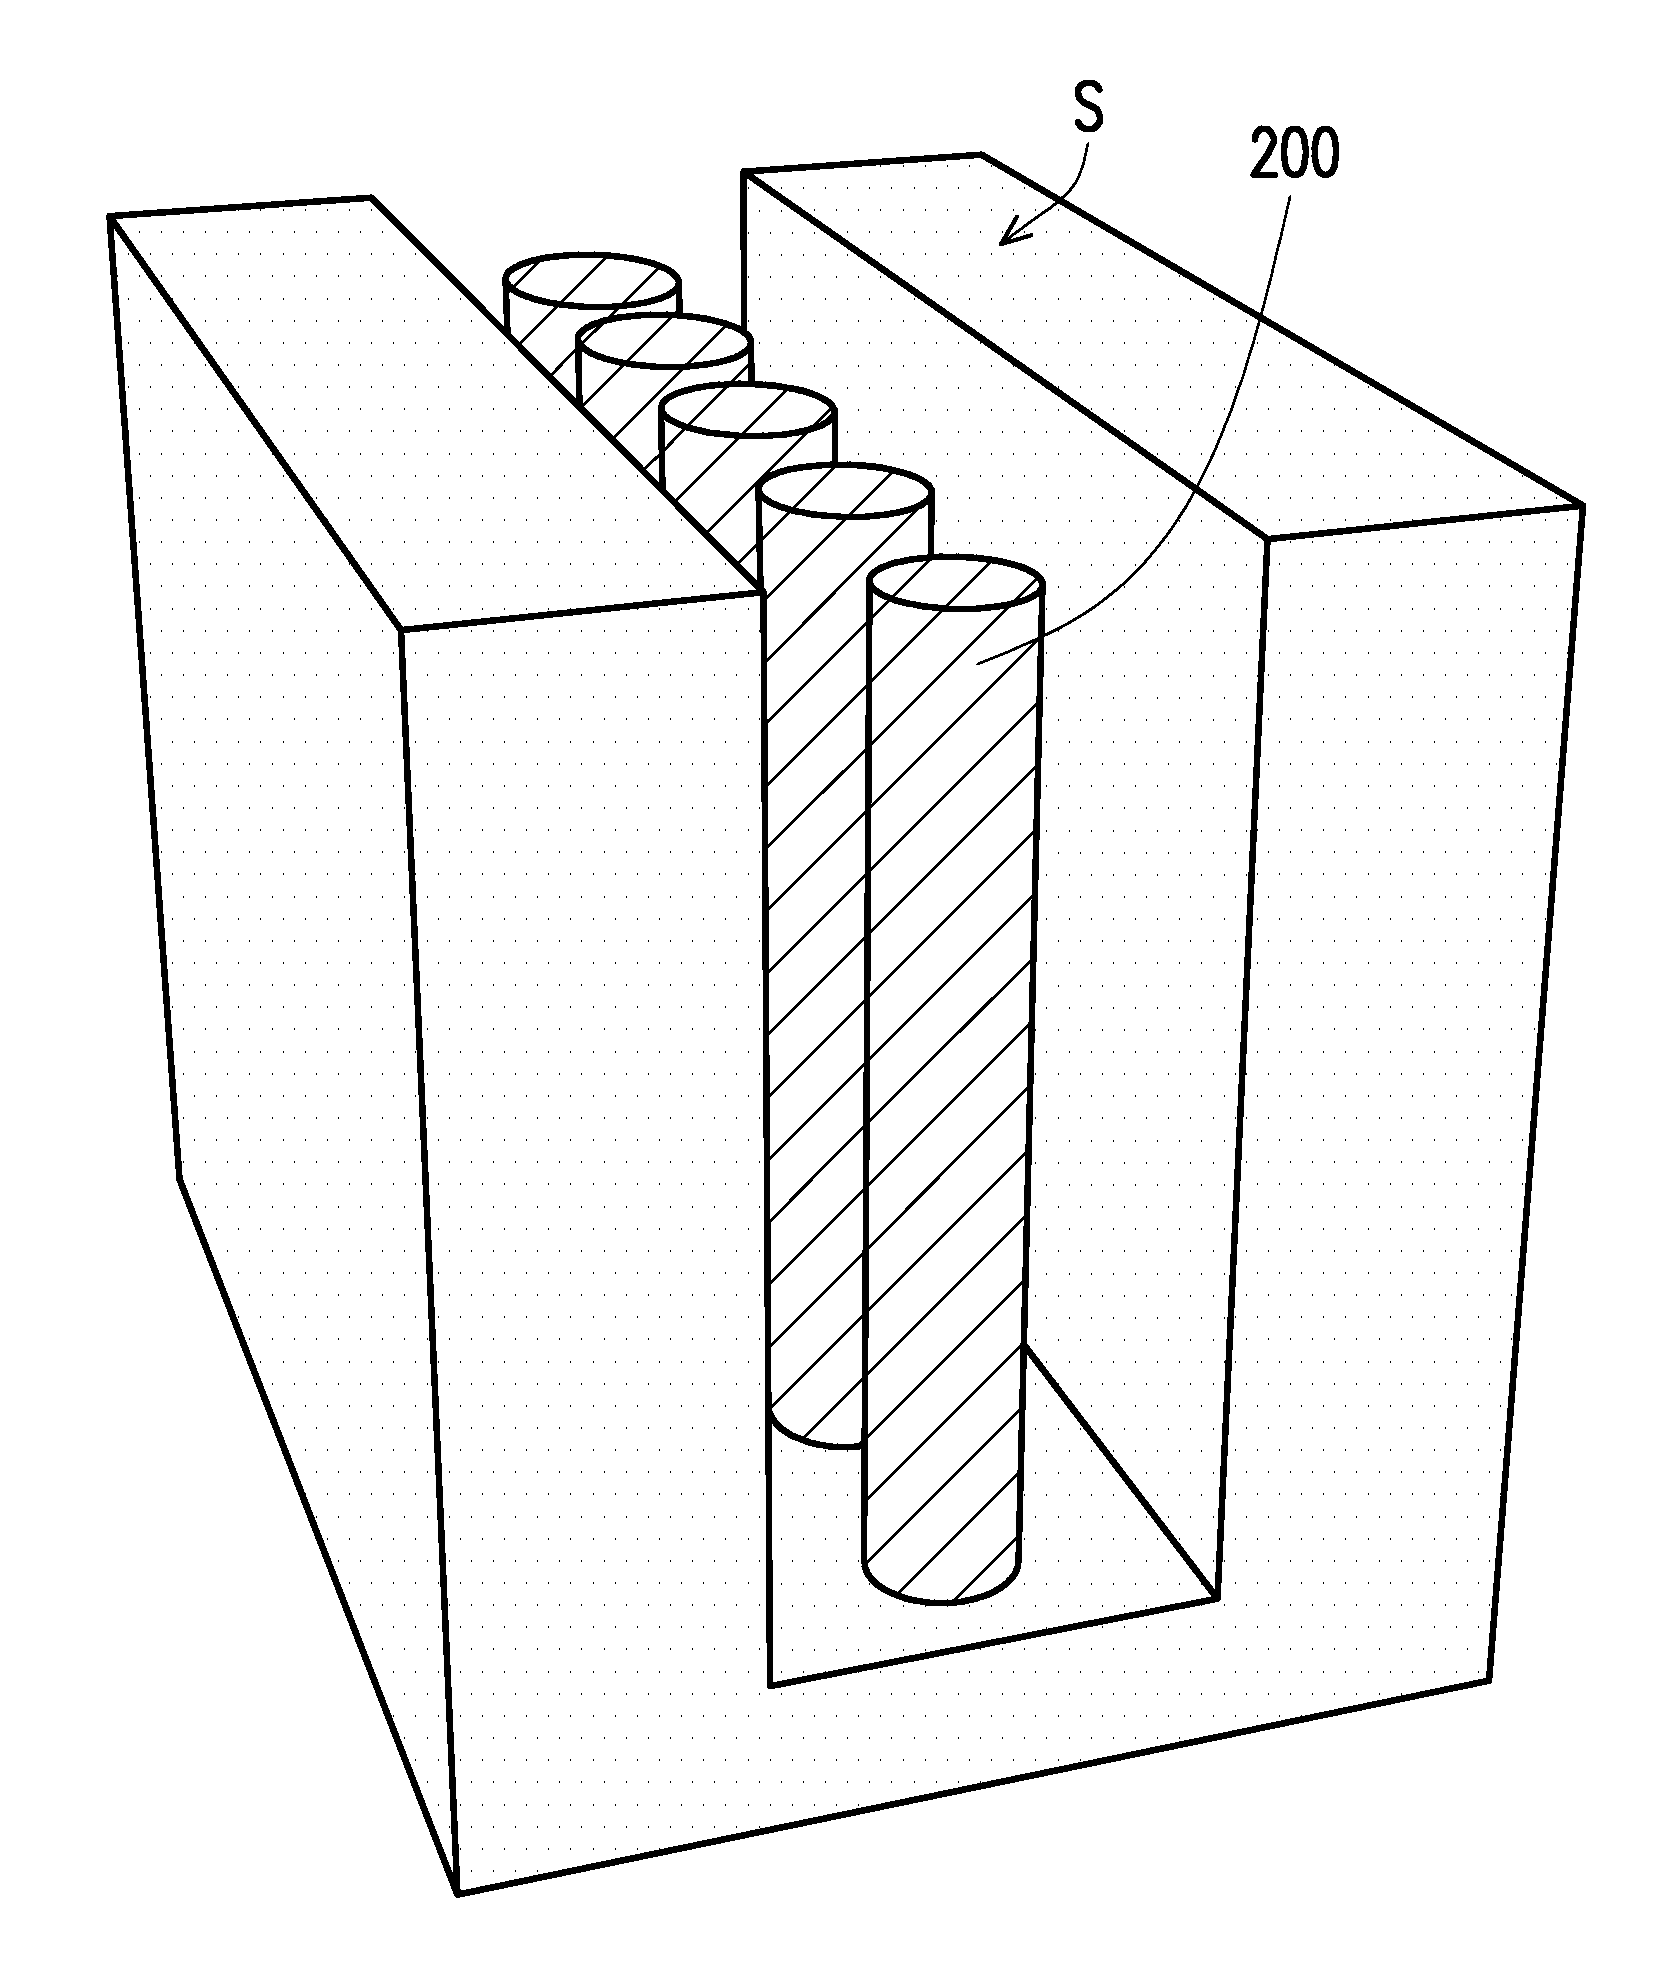 Method of fabricating magnetically actuated artificial cilia